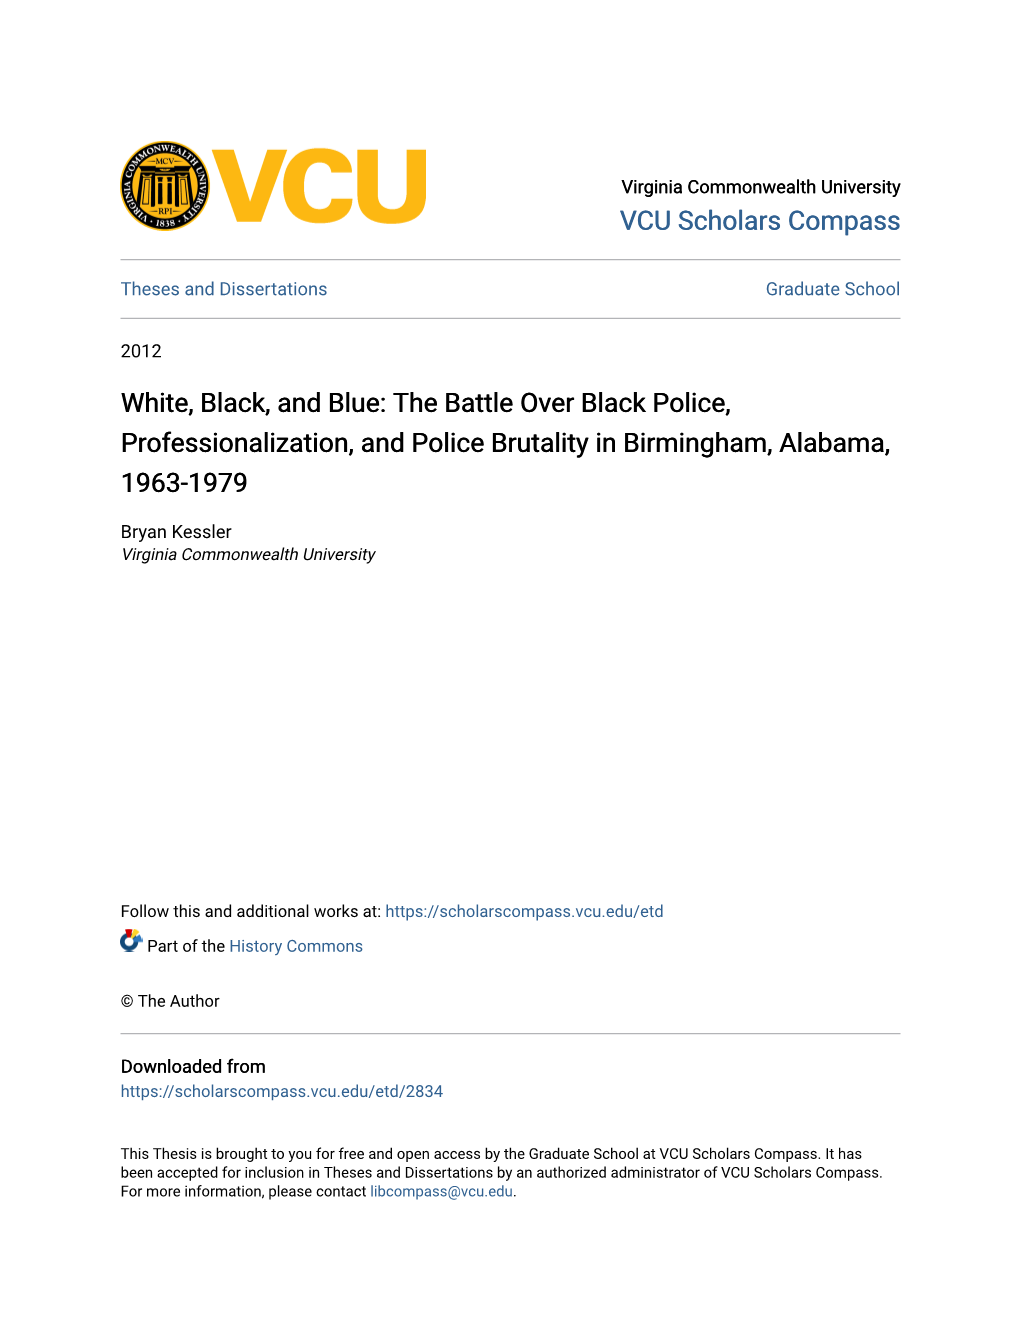 The Battle Over Black Police, Professionalization, and Police Brutality in Birmingham, Alabama, 1963-1979